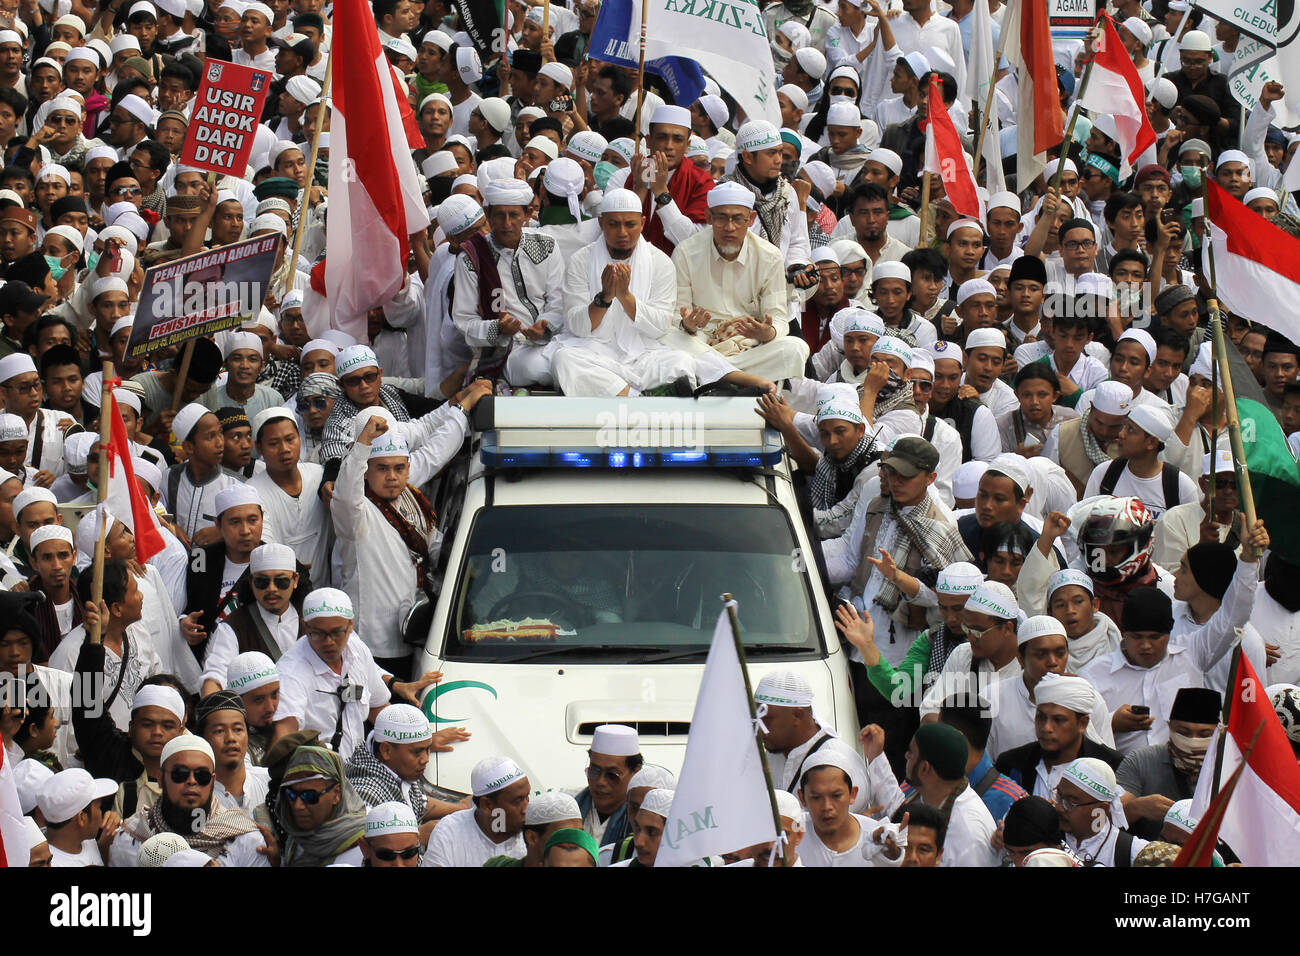 The leaders of moslem people alliances who are leads a huge rally to condemn the blasphemy of their religion in Jakarta. Stock Photo